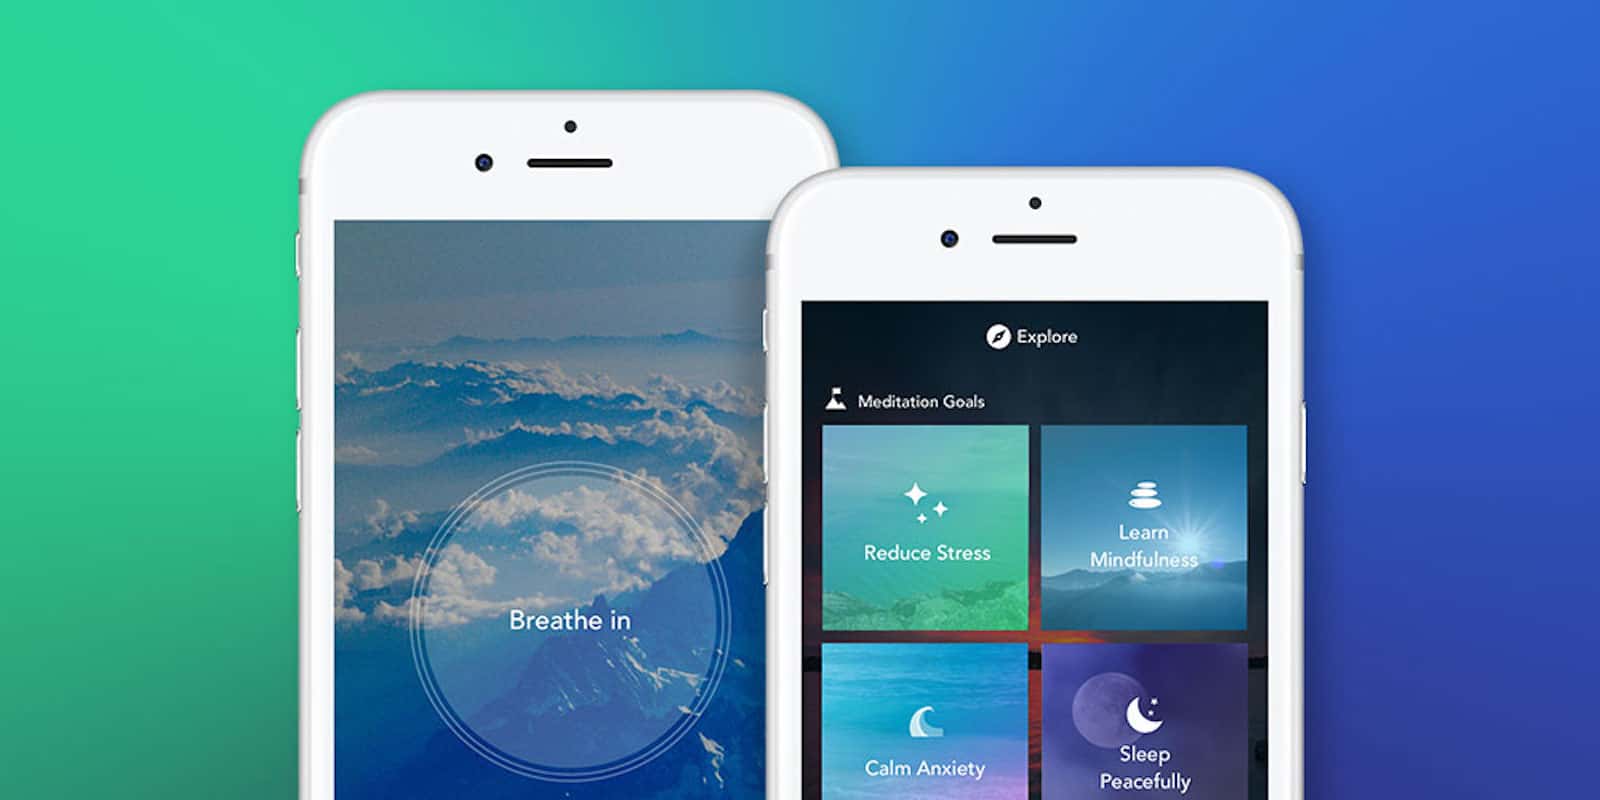 This app can help keep you in the moment, via short, guided meditation sessions.